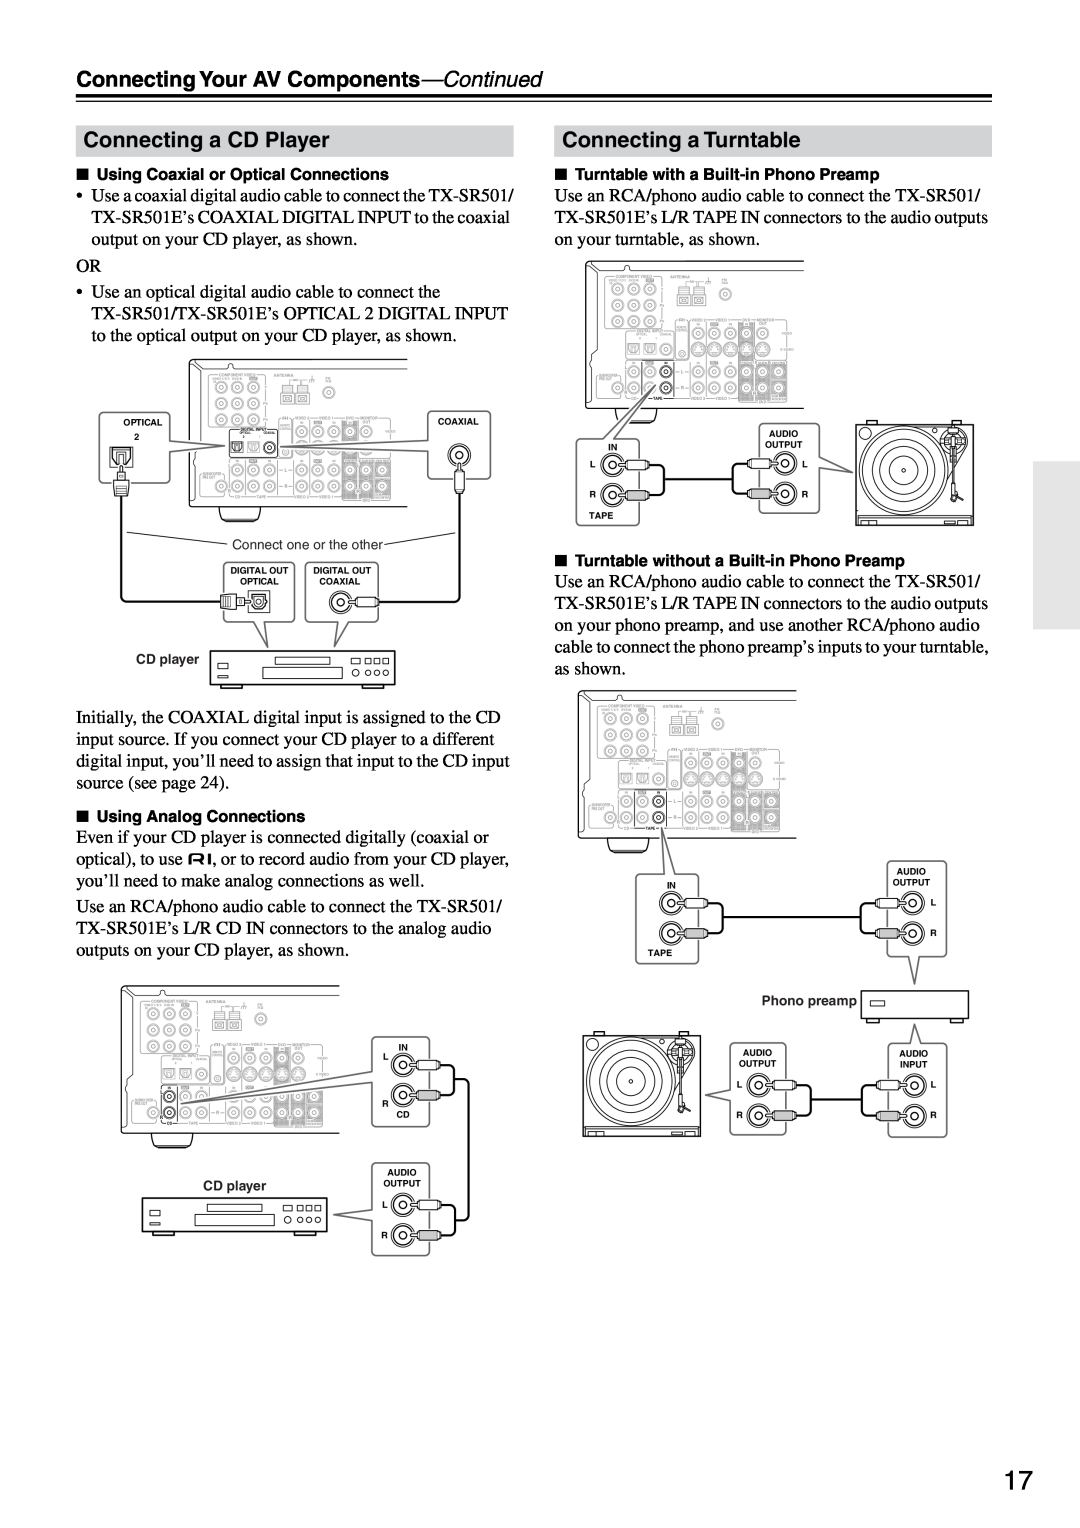 Onkyo TX-SR501E instruction manual Connecting a CD Player, Connecting a Turntable, Connecting Your AV Components-Continued 